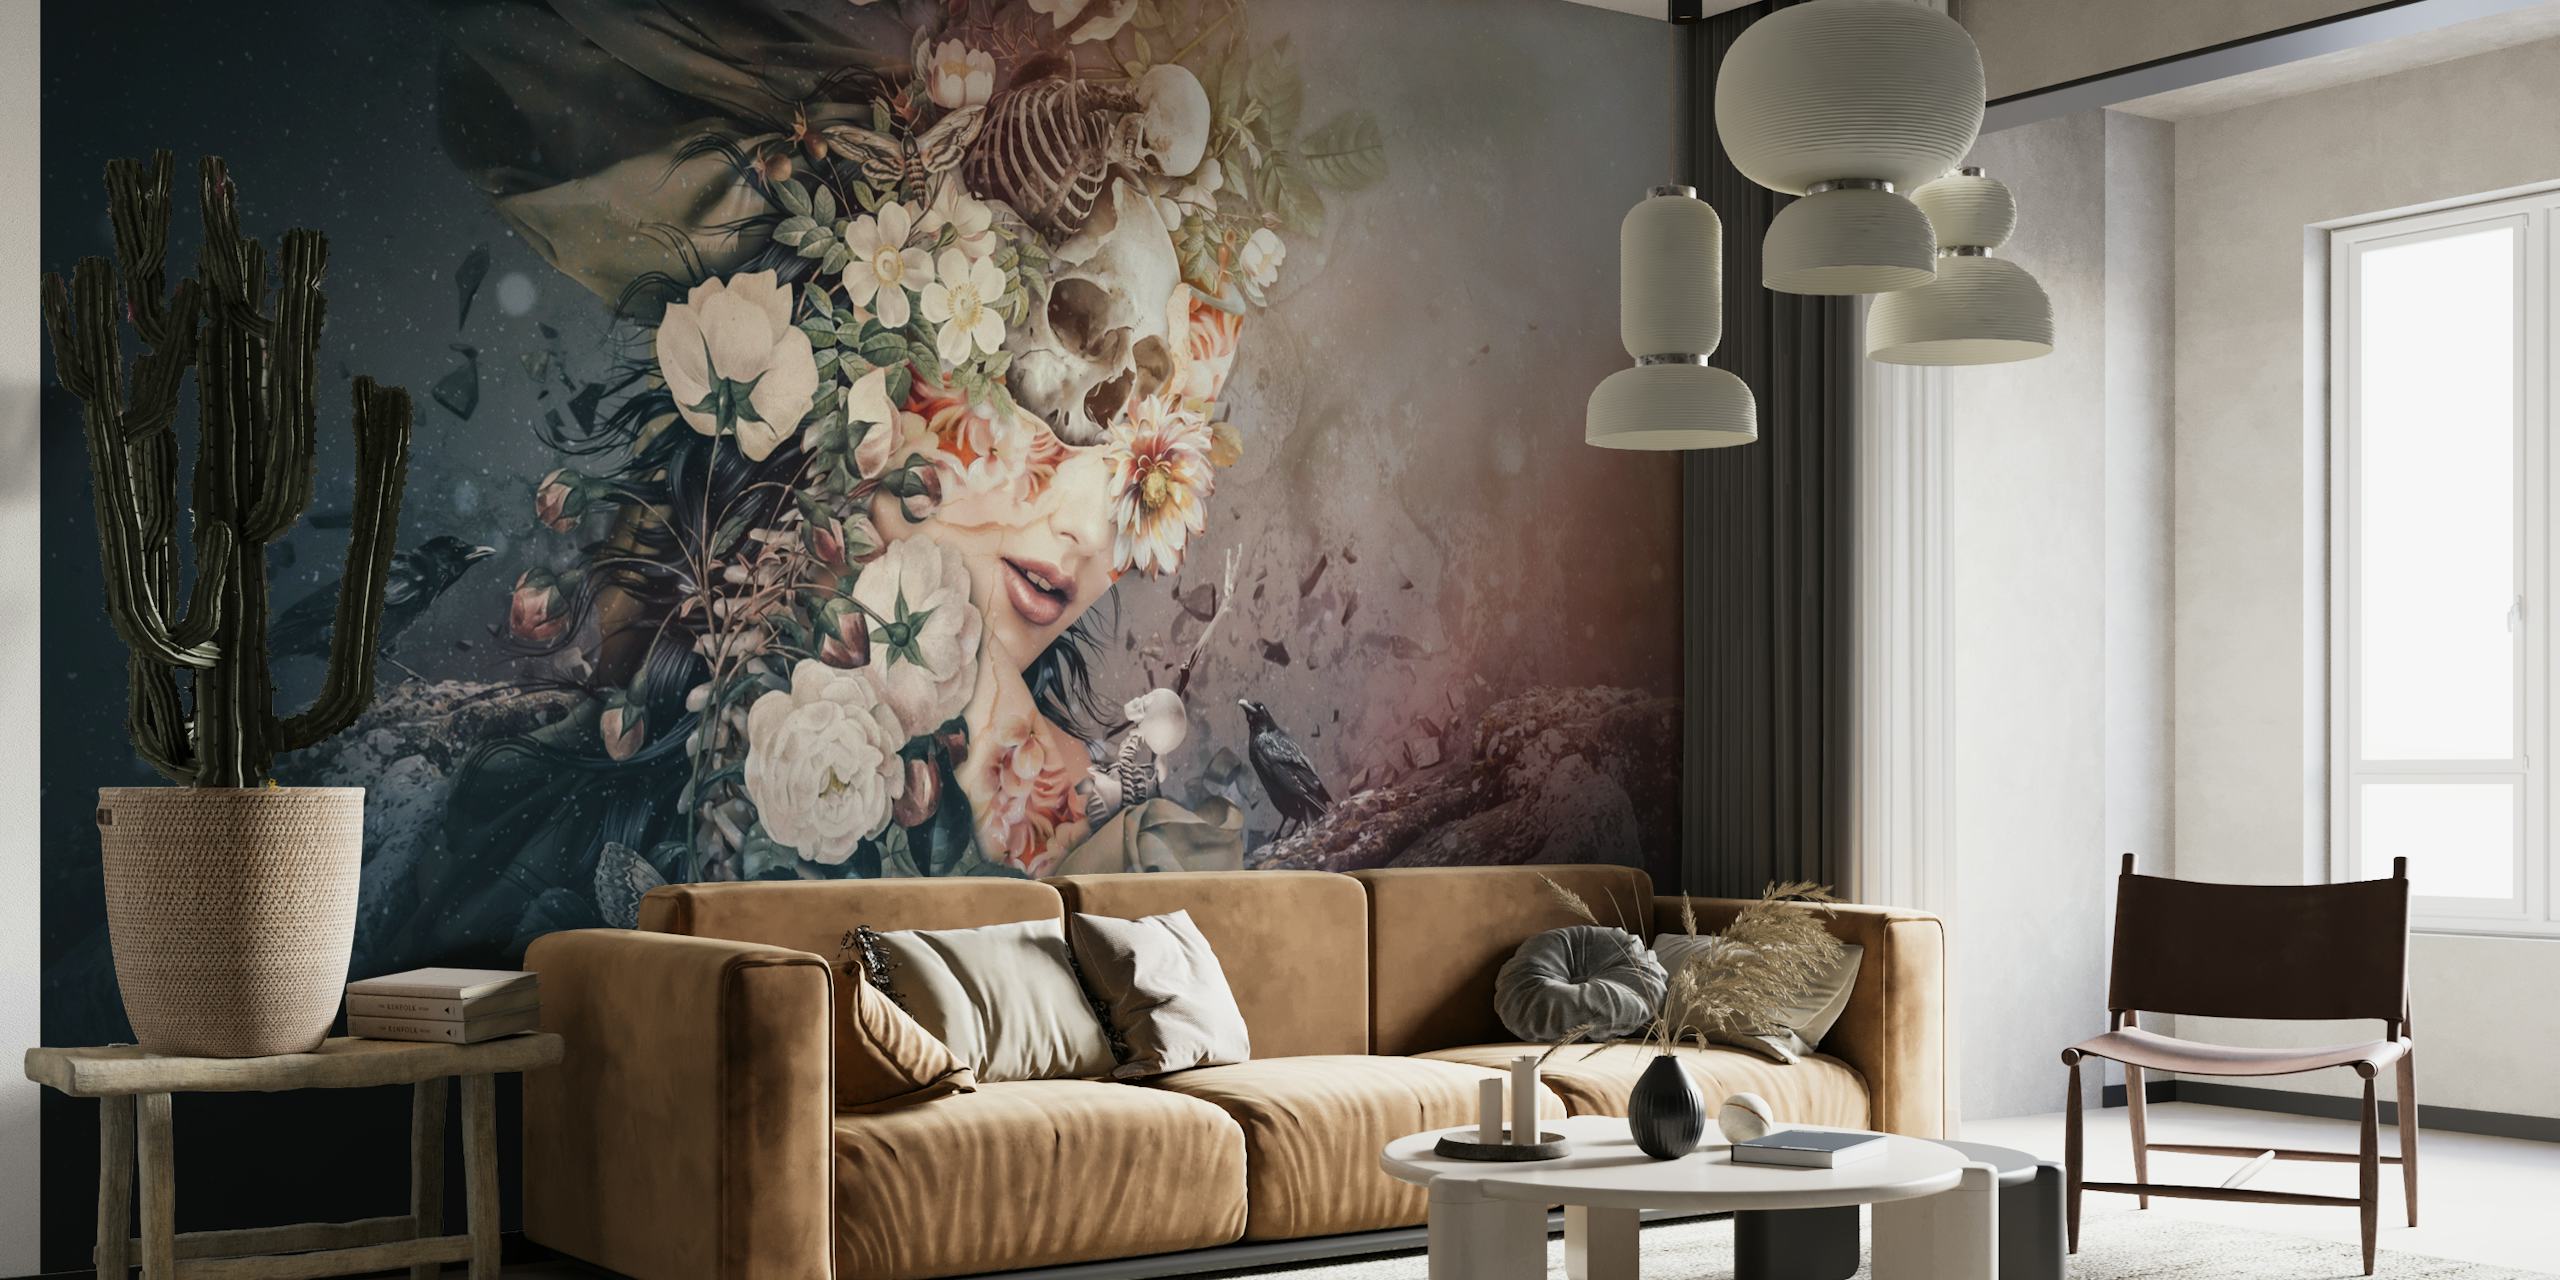 A dramatic wall mural featuring a transition from dark to light with delicate floral elements